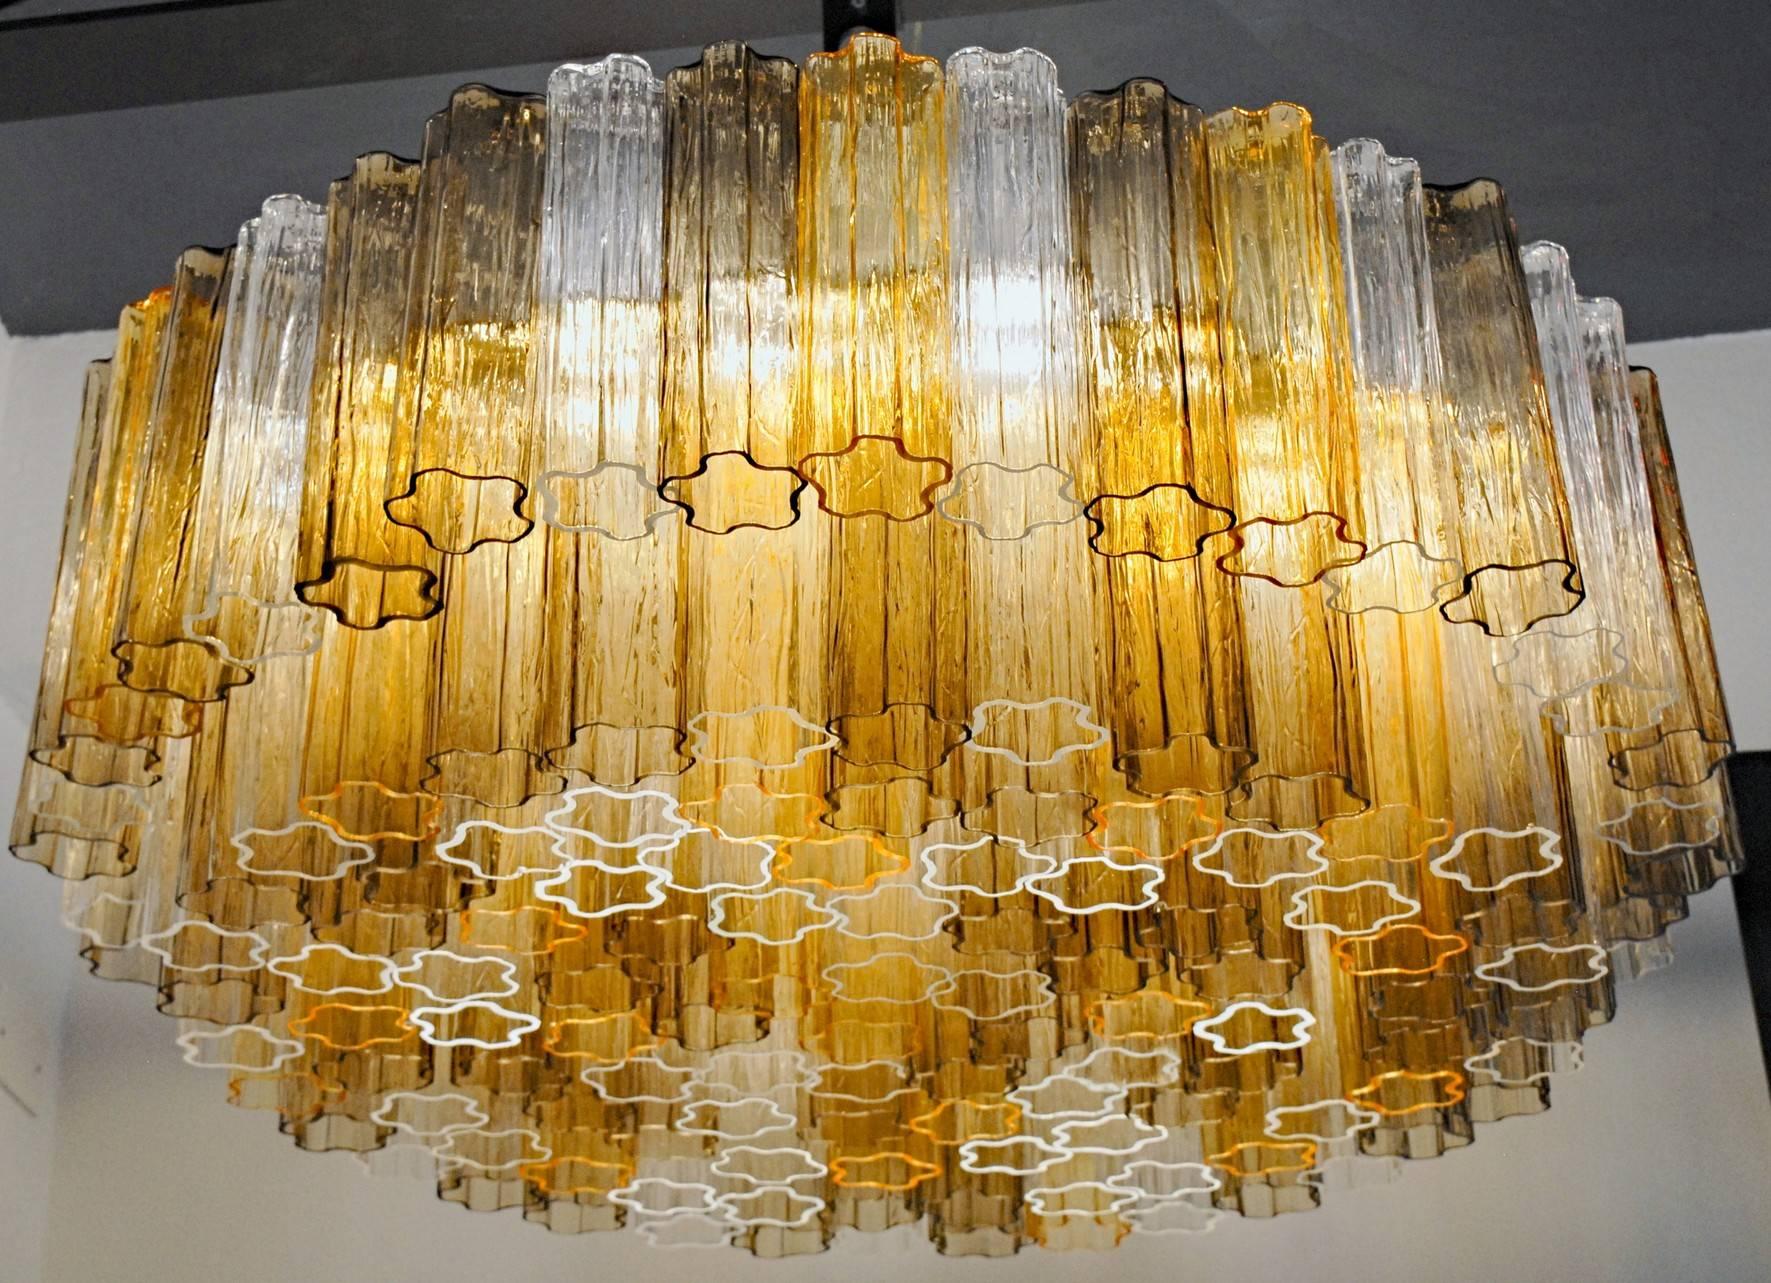 This chandelier was designed by Toni Zuccher for Venini. Rare color combination with amber, clear and taupe grey. The cut at the bottom of each element is highlighted when lit, see pictures. There are more than 120 glass Murano glass blown